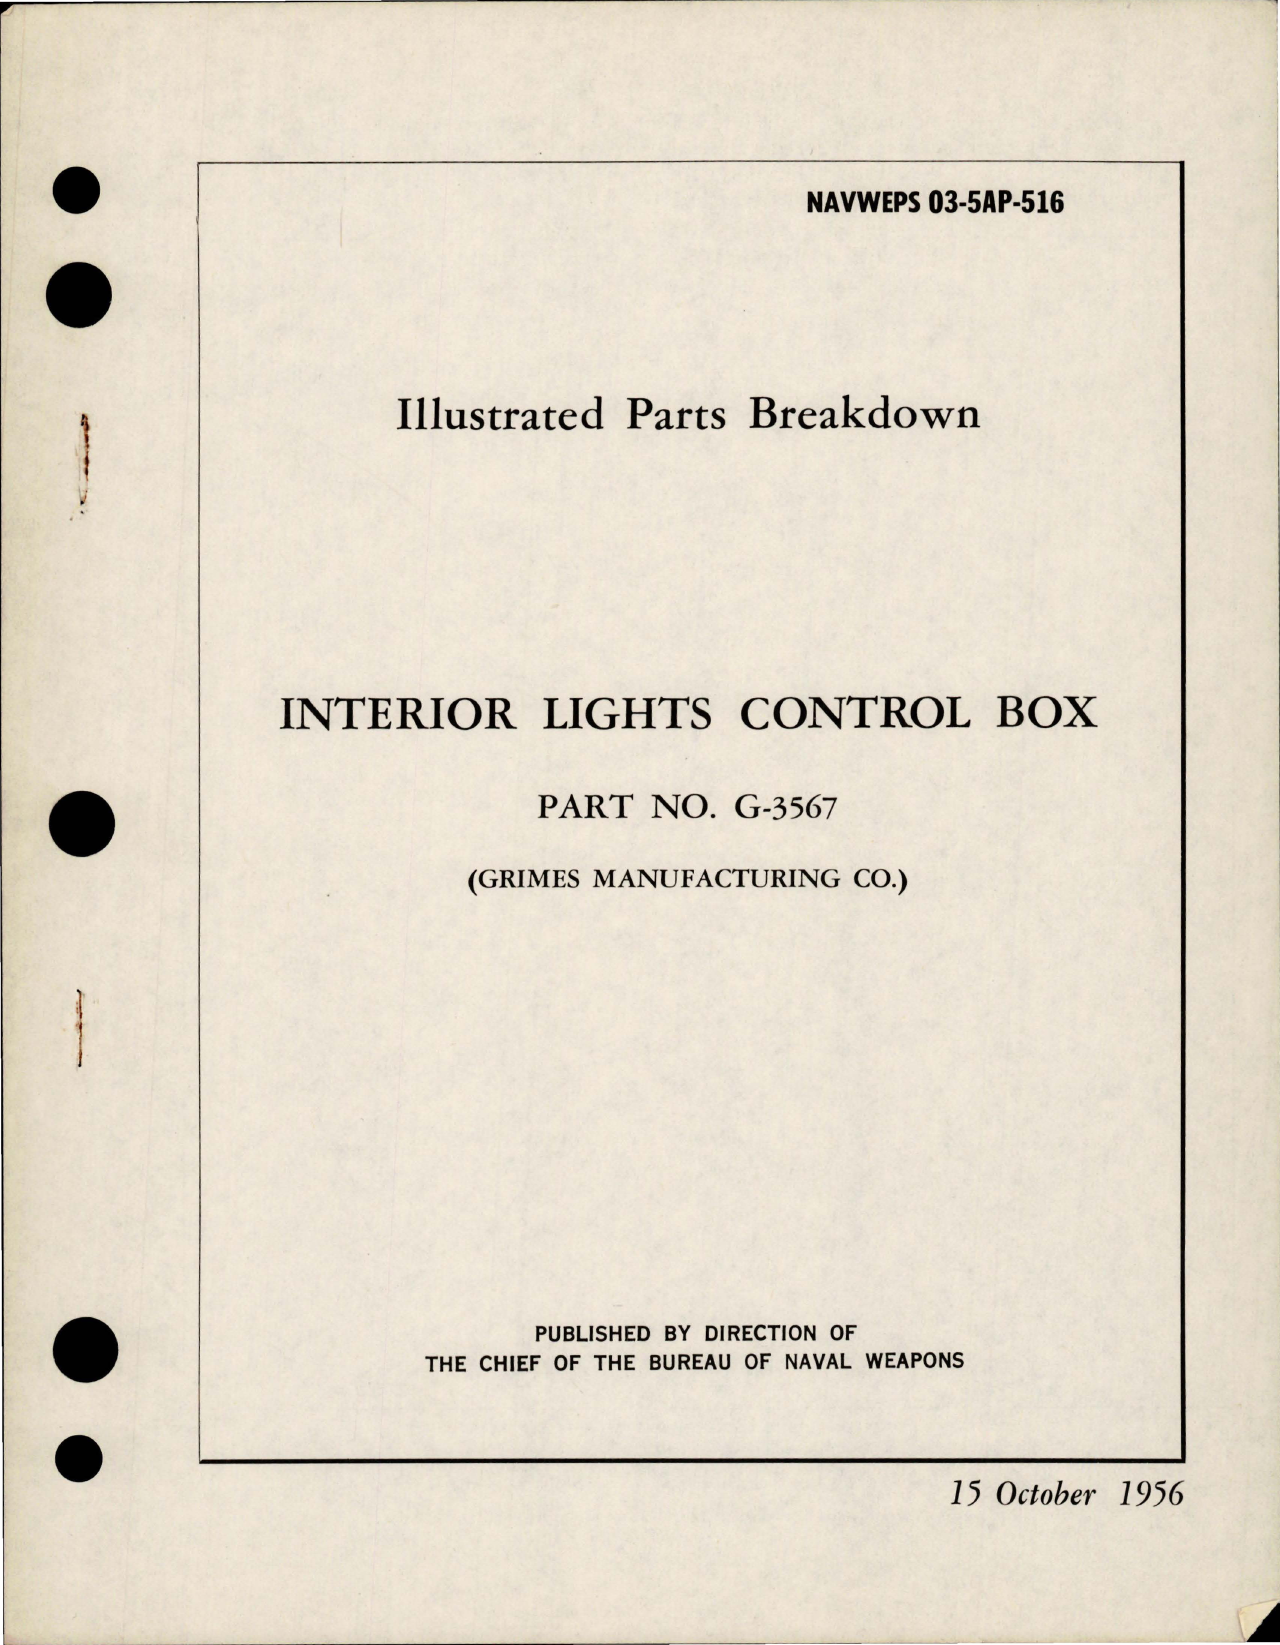 Sample page 1 from AirCorps Library document: Illustrated Parts Breakdown for Interior Lights Control Box - Part G-3567 